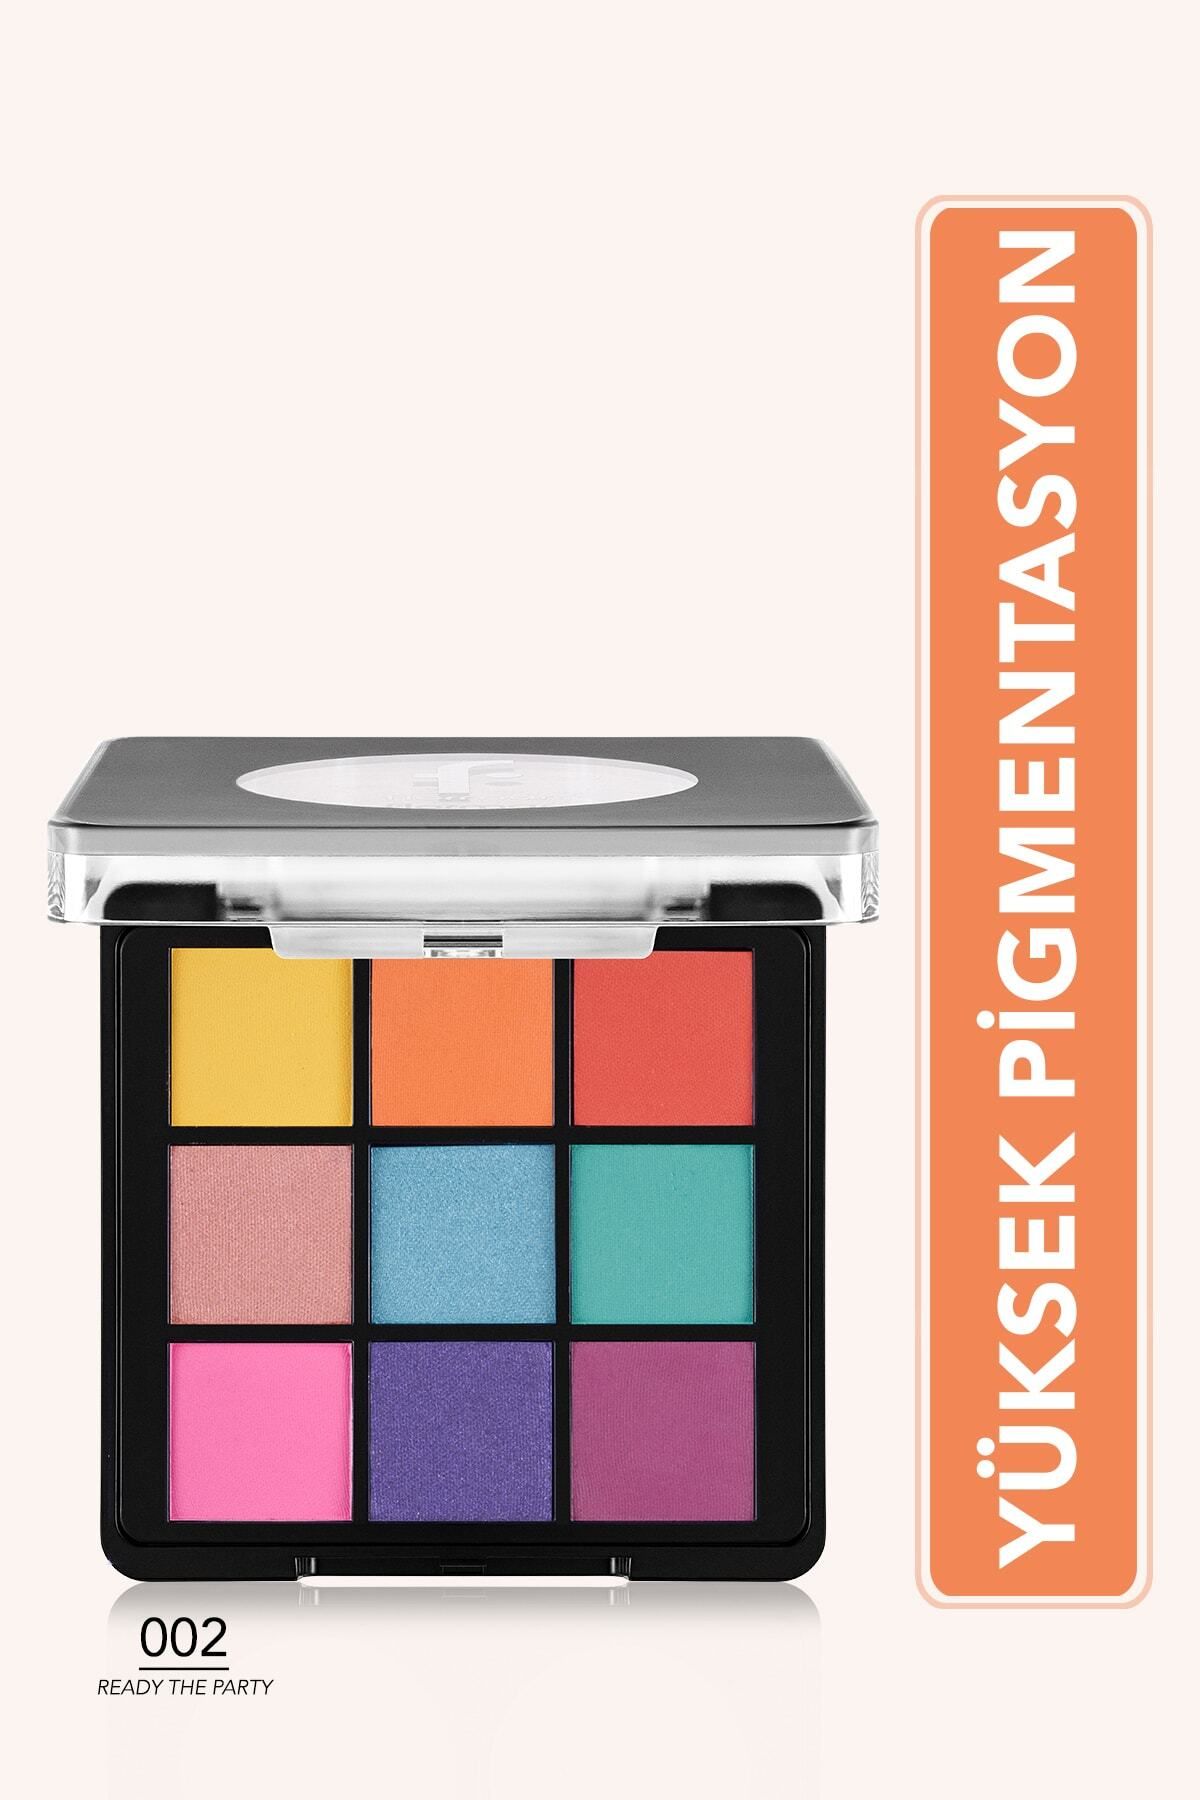 Flormar INTENSELY PİGMENTED EYESHADOW PALETTE - EYE SHADOW PALETTE - 002 READY THE PARTY- PSSN1329